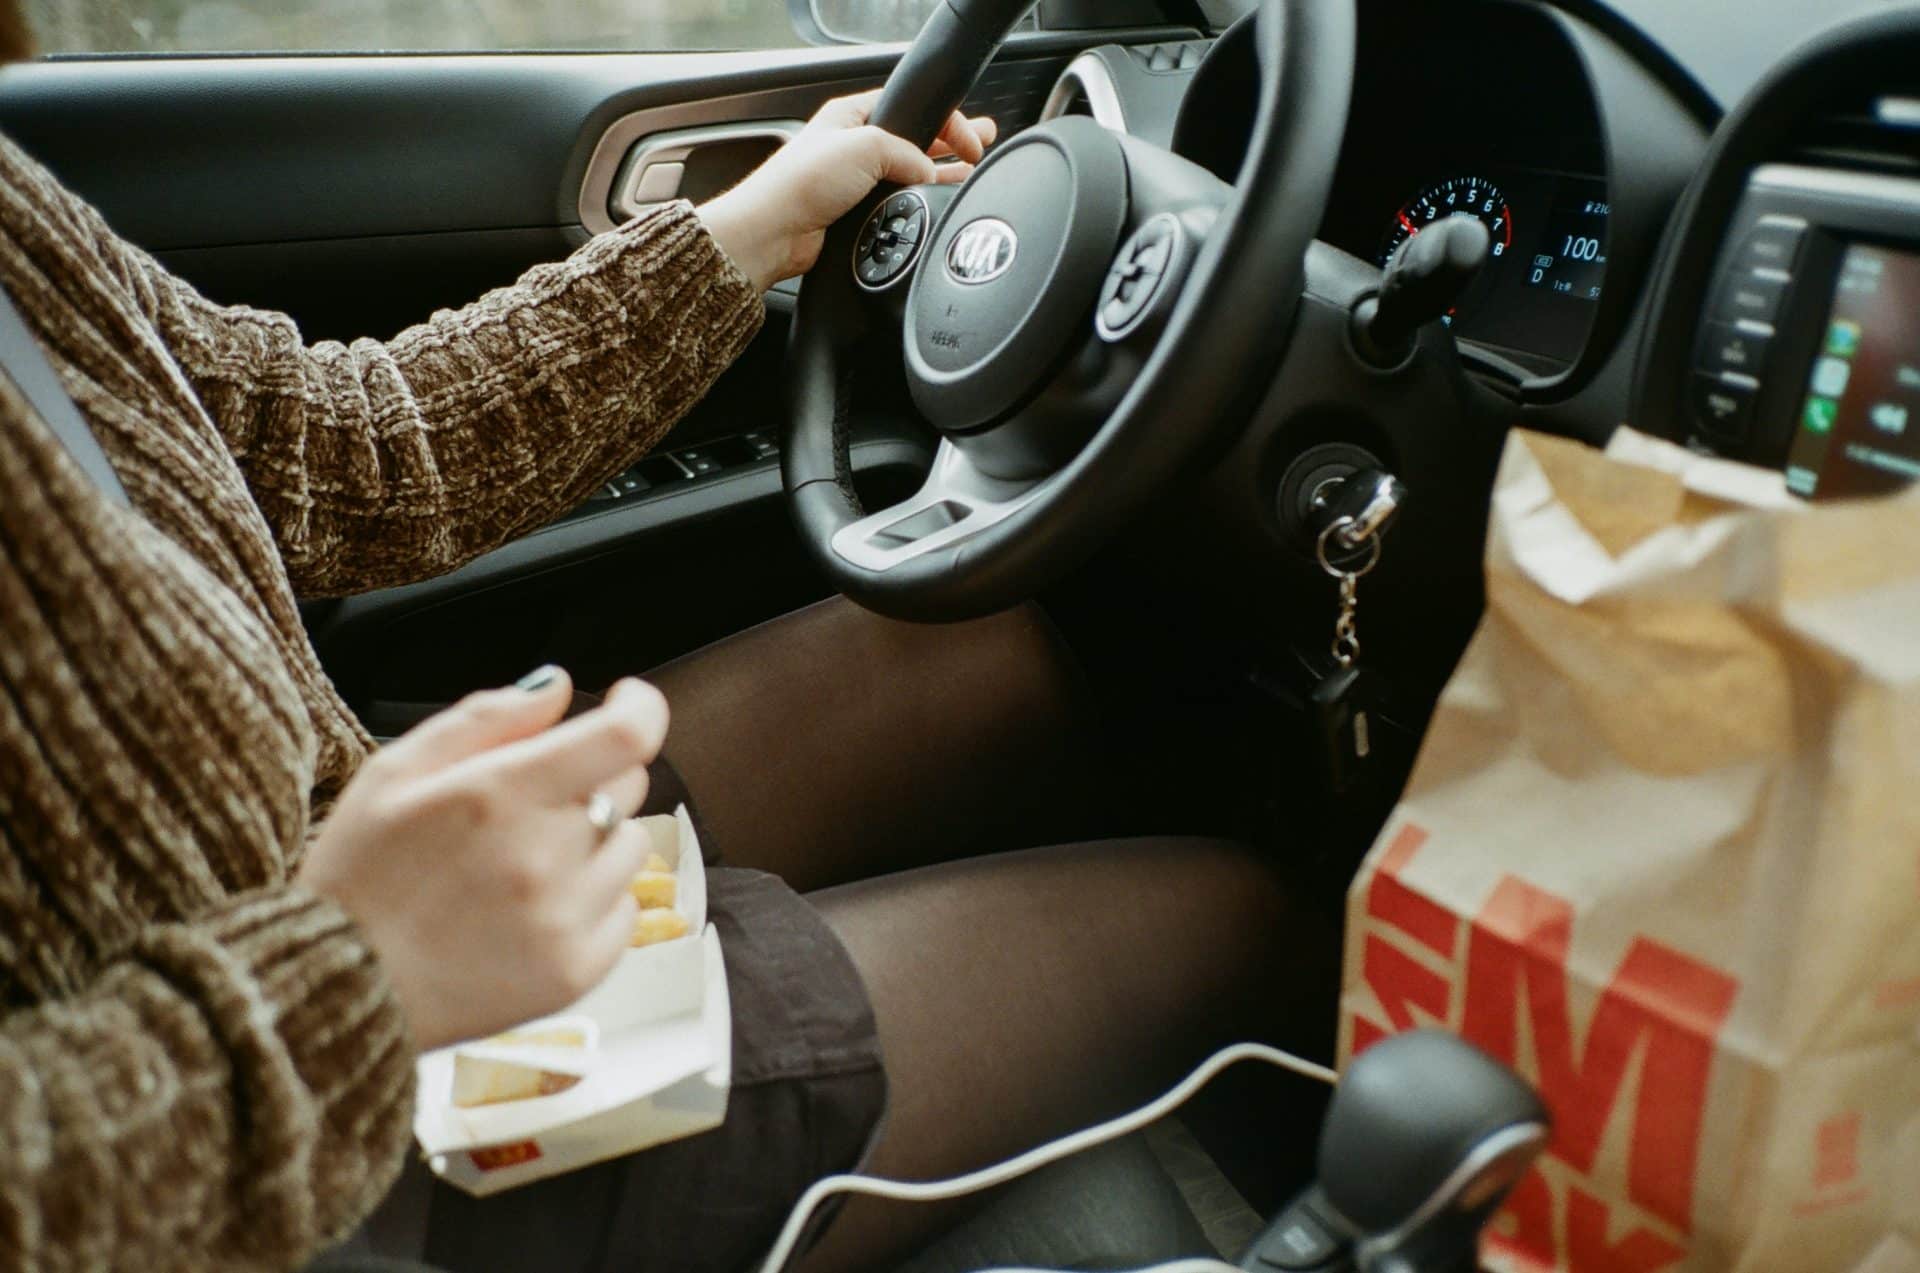 Eating in Your Car? Avoid a Mess With These 7 Tips